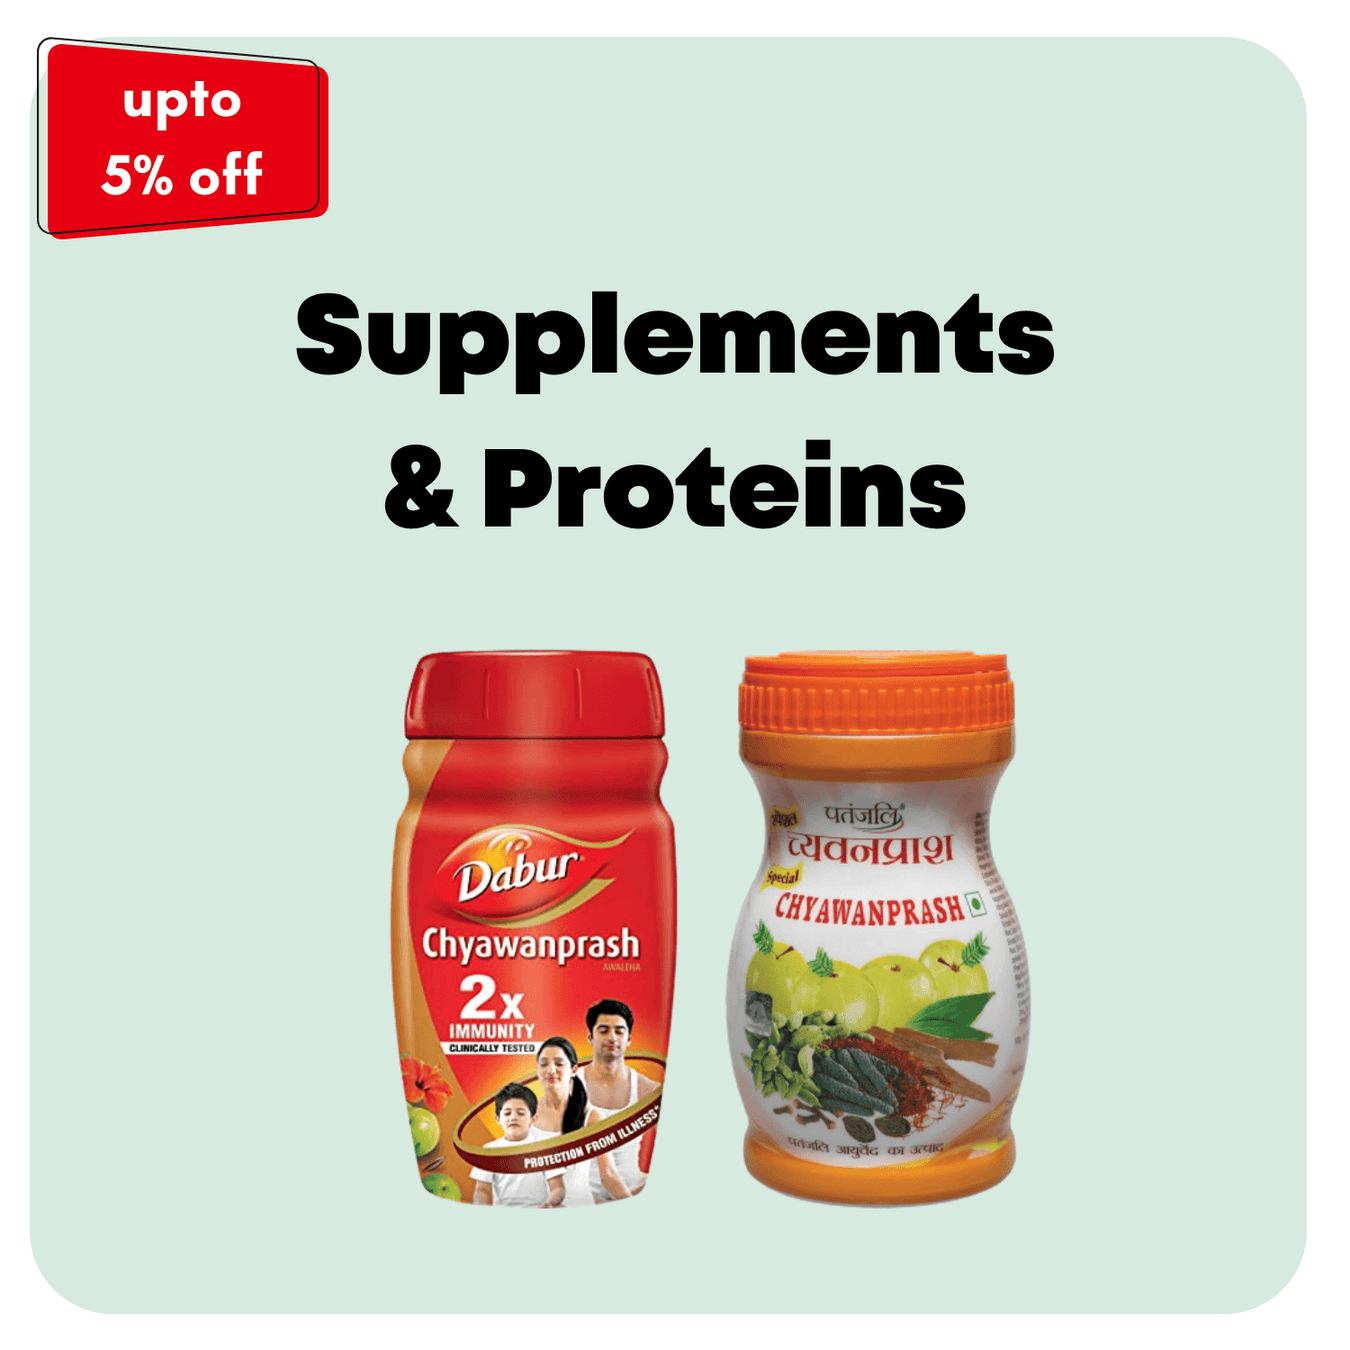 Supplements & Proteins - Quick Pantry